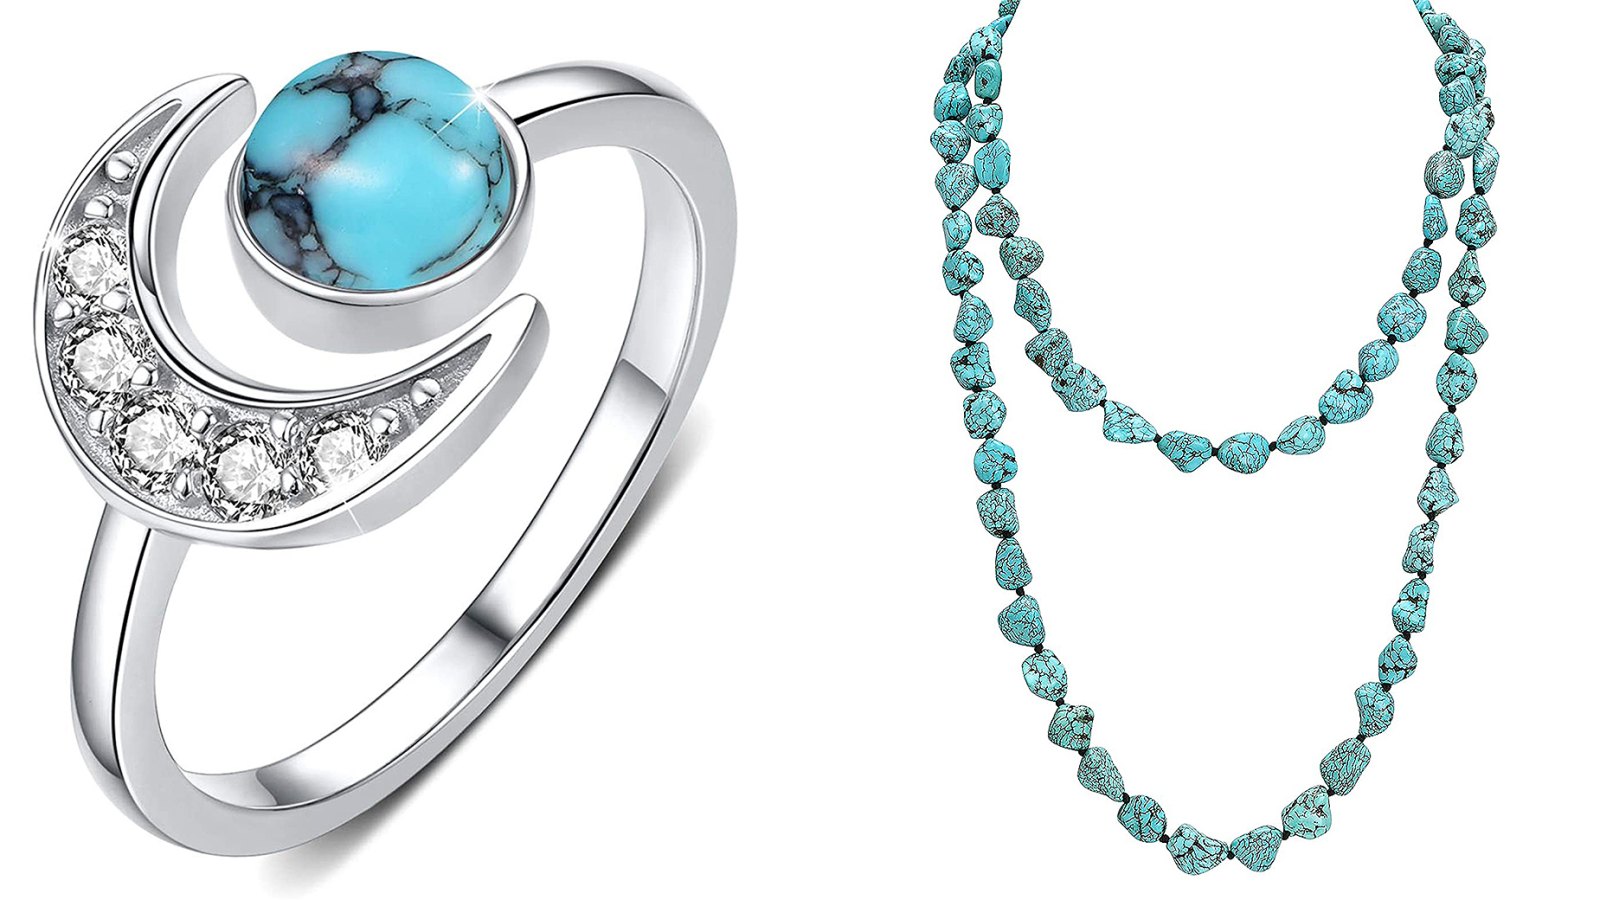 Turquoise Jewelry Pieces We Want to Wear NonStop